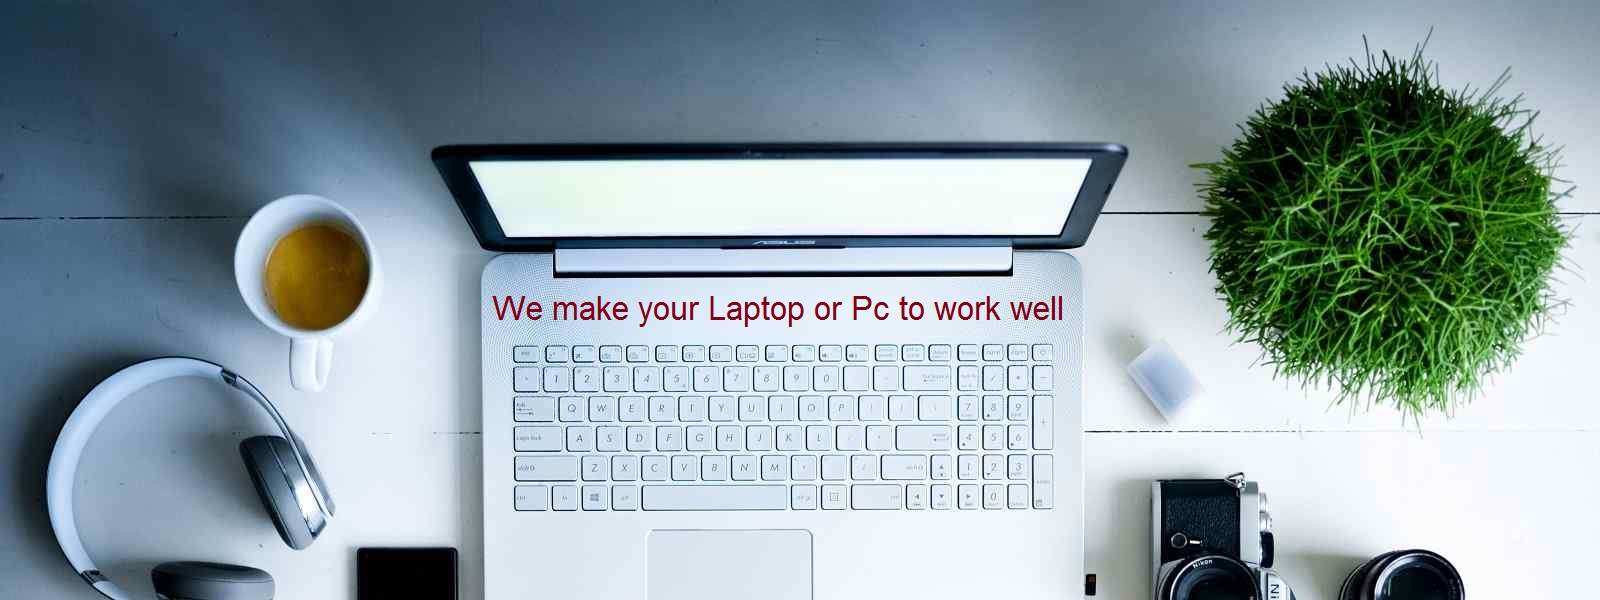 We make your Laptop or Pc to work well